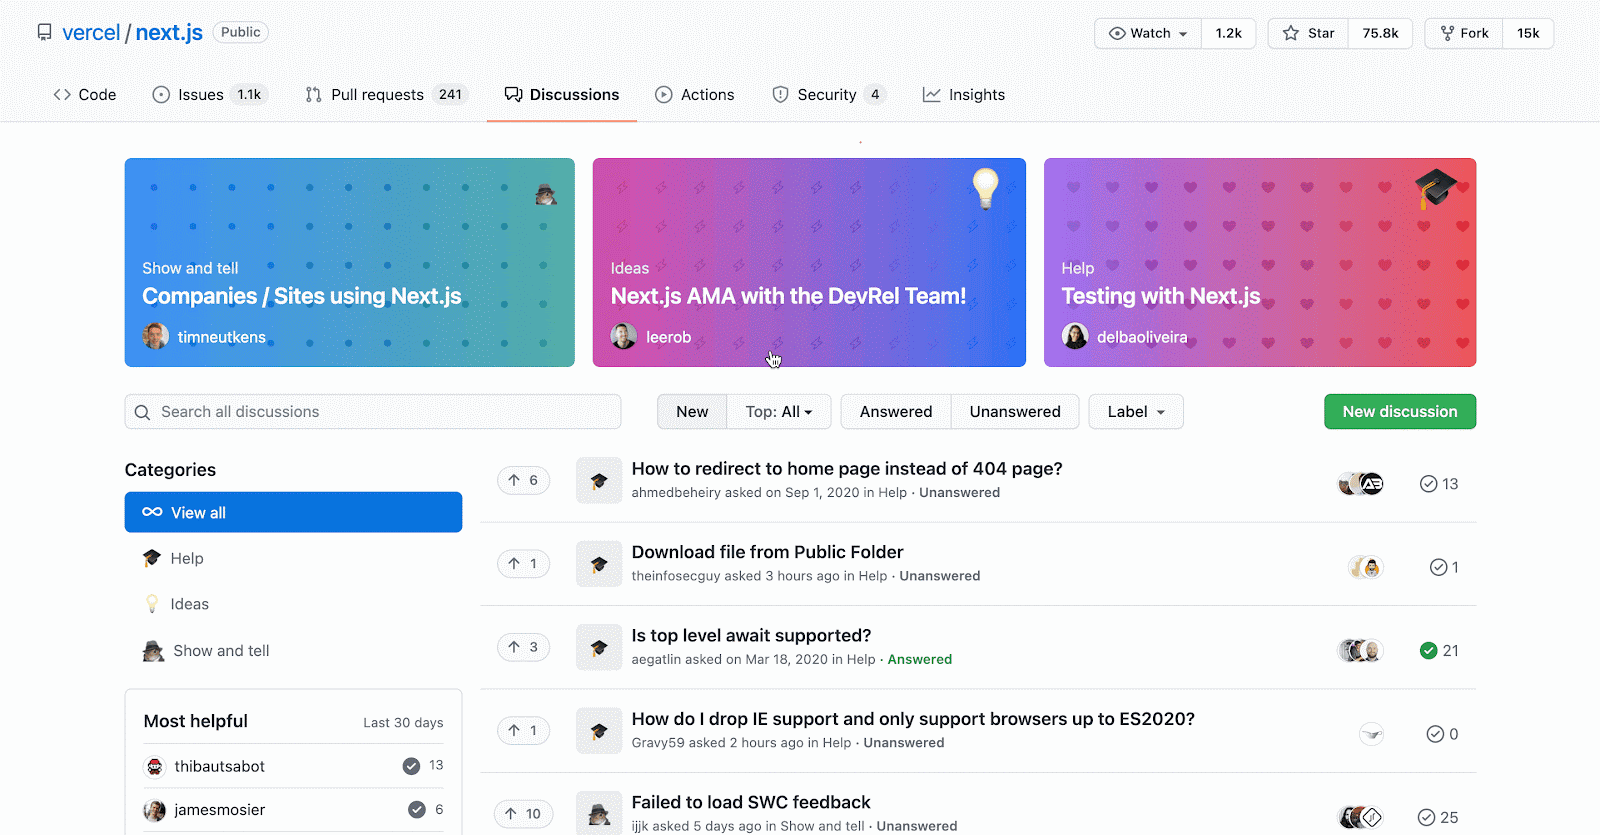 Translations for Discussions - The GitHub Blog